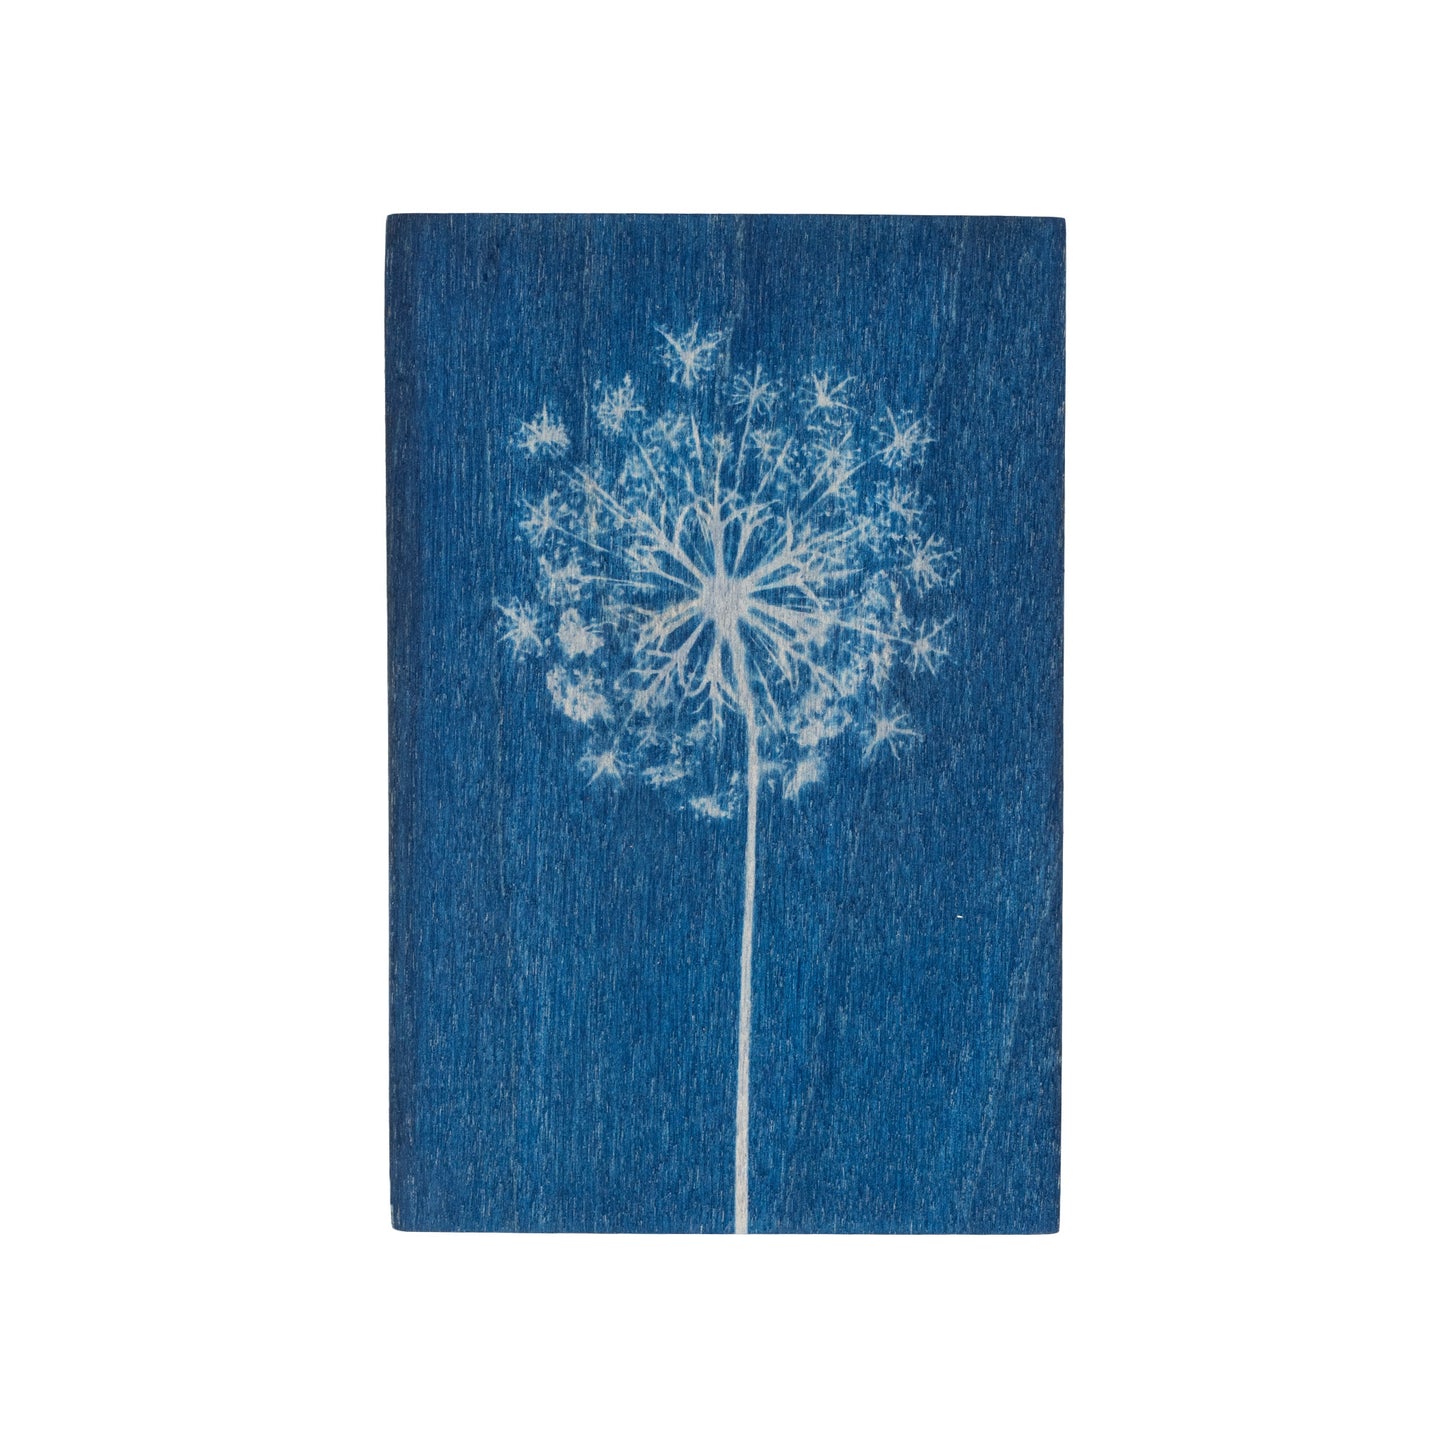 Wooden postcard with cyanotype print of wild carrot